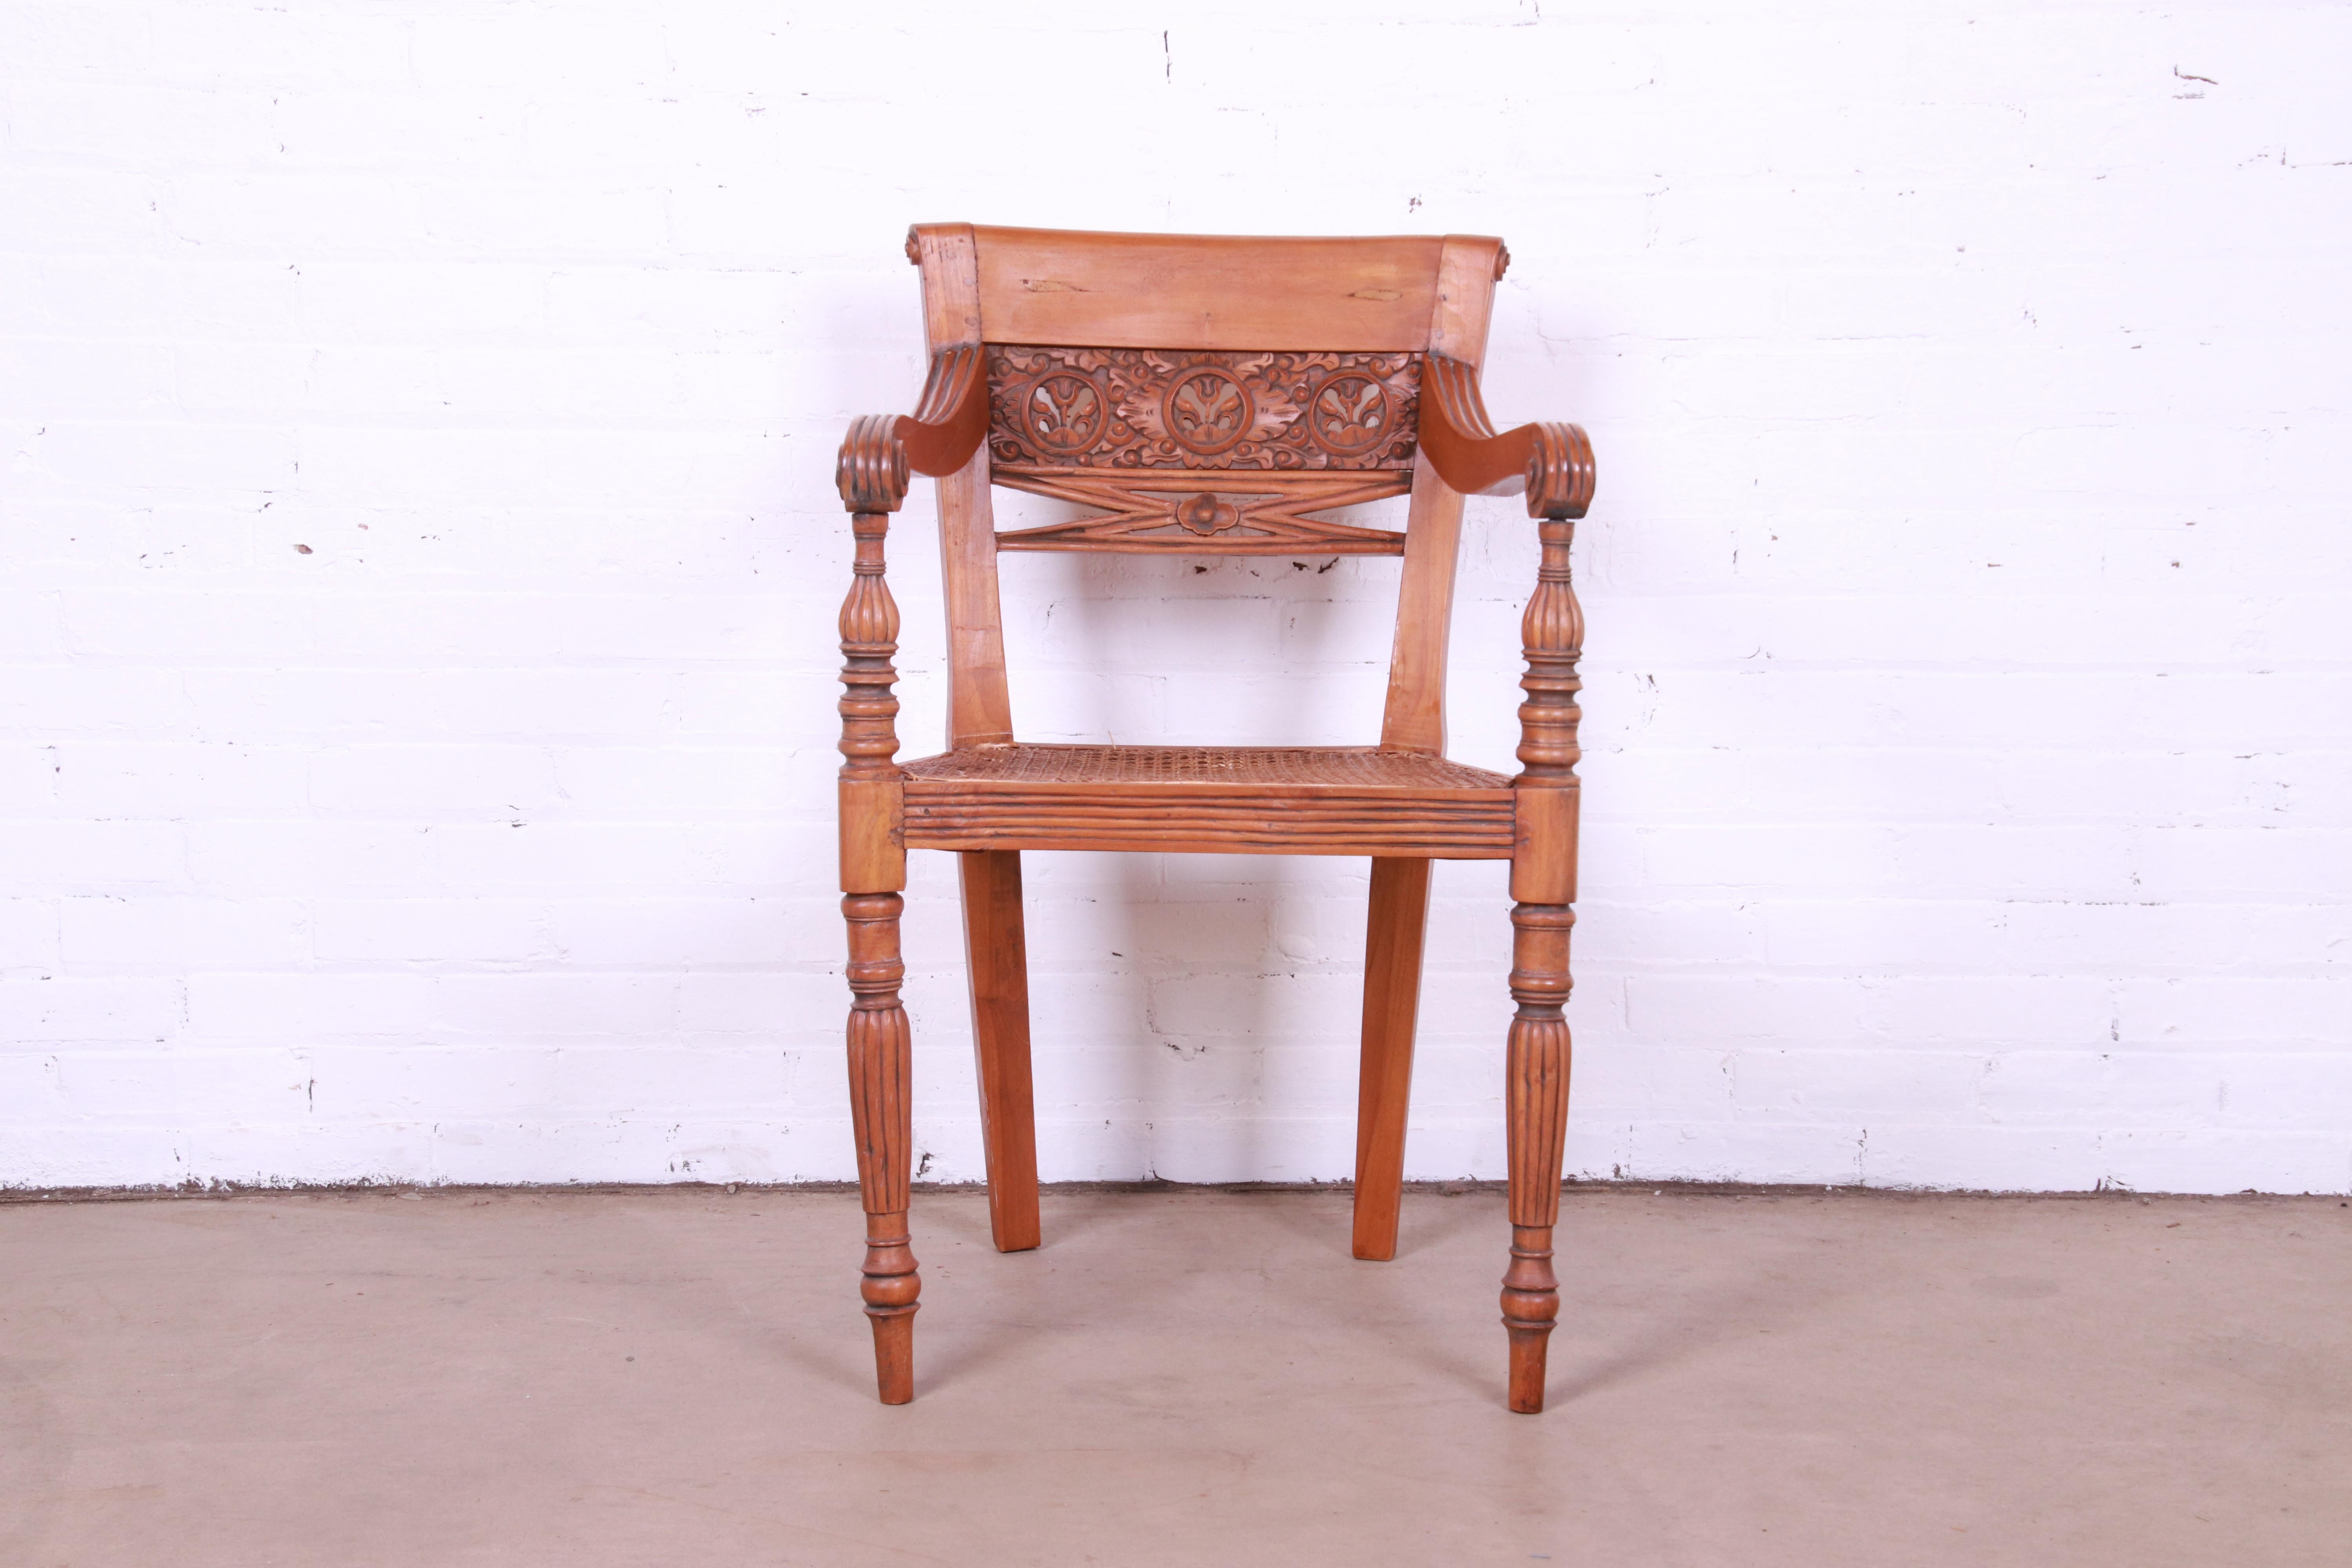 20th Century Vintage Regency Carved Walnut and Cane Armchair, Circa 1940s For Sale